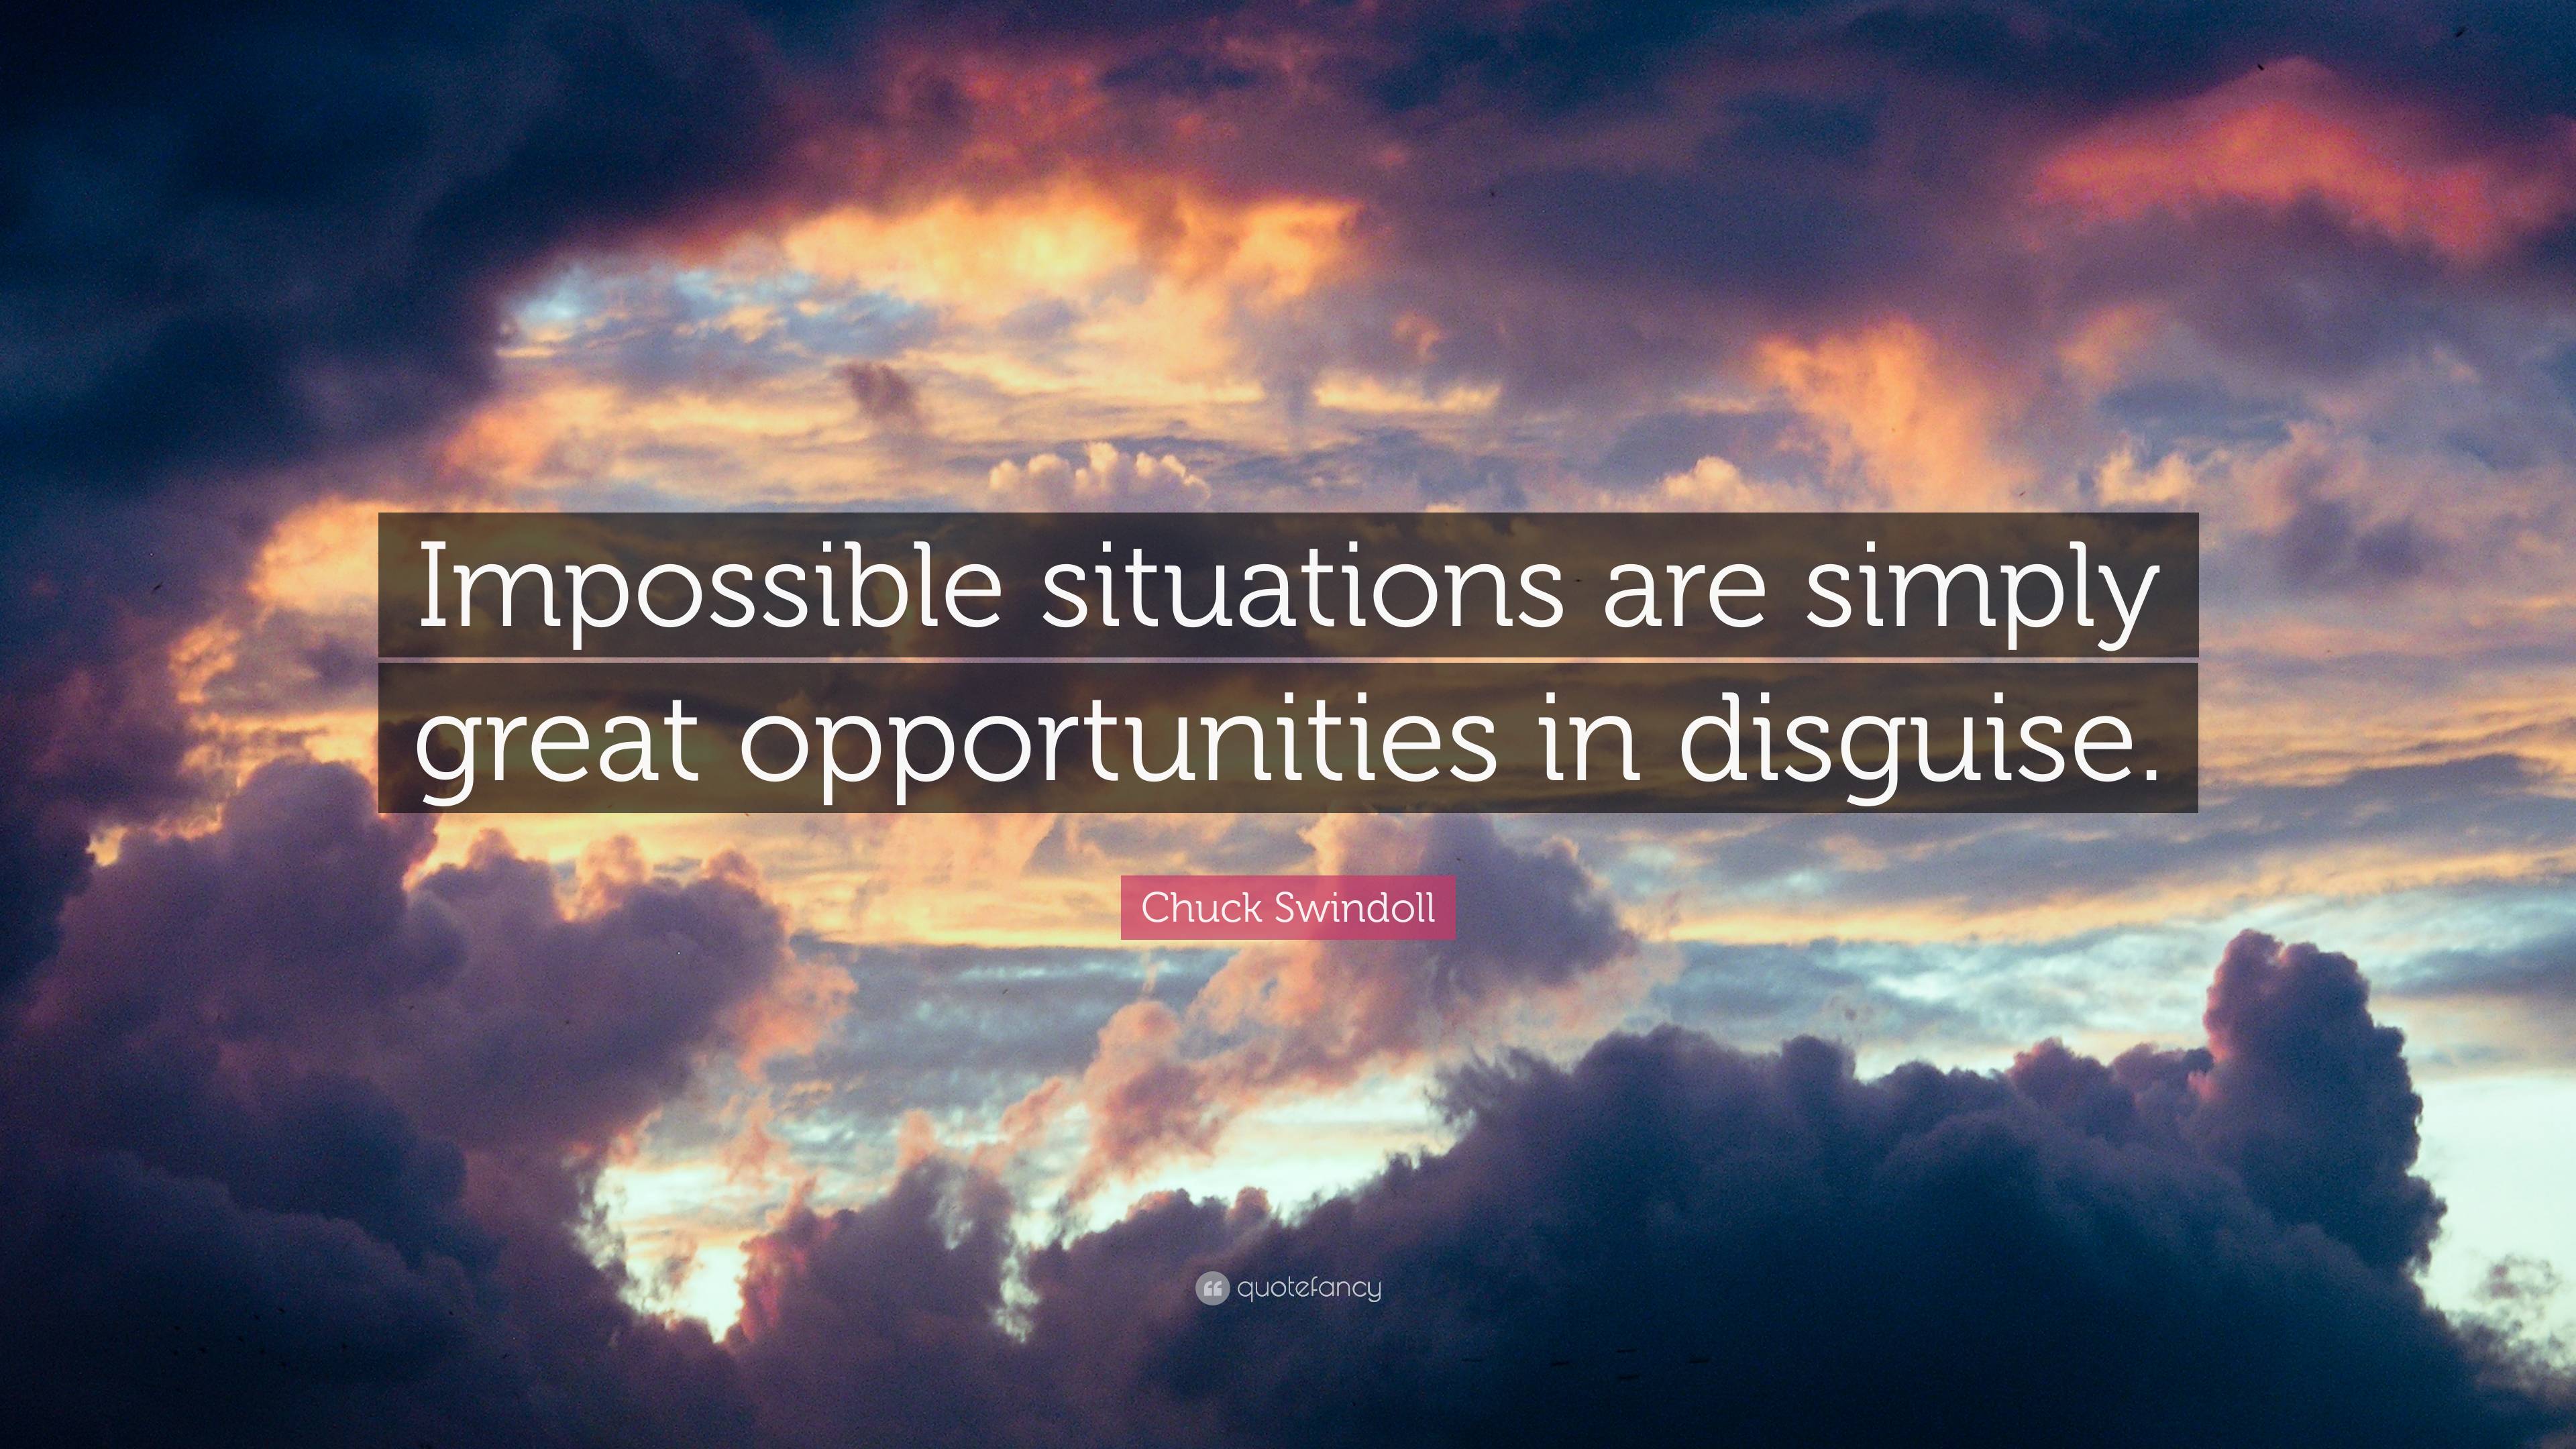 Chuck Swindoll Quote: “Impossible situations are simply great ...